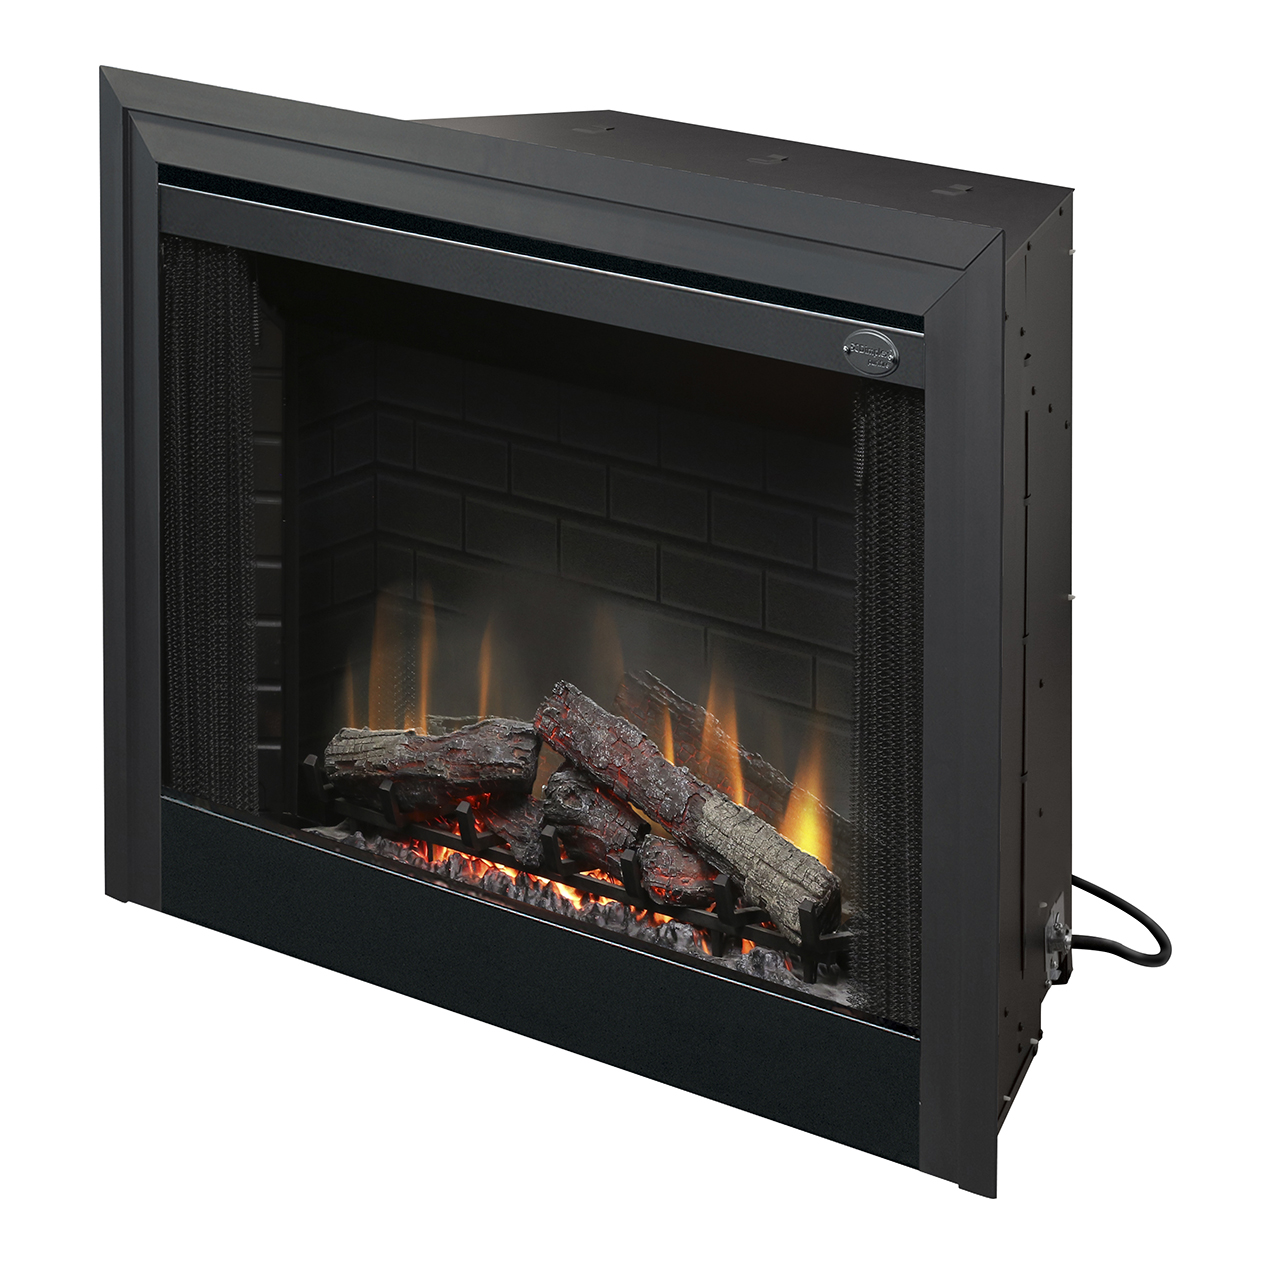 39 inch bf deluxe built-in electric firebox product image